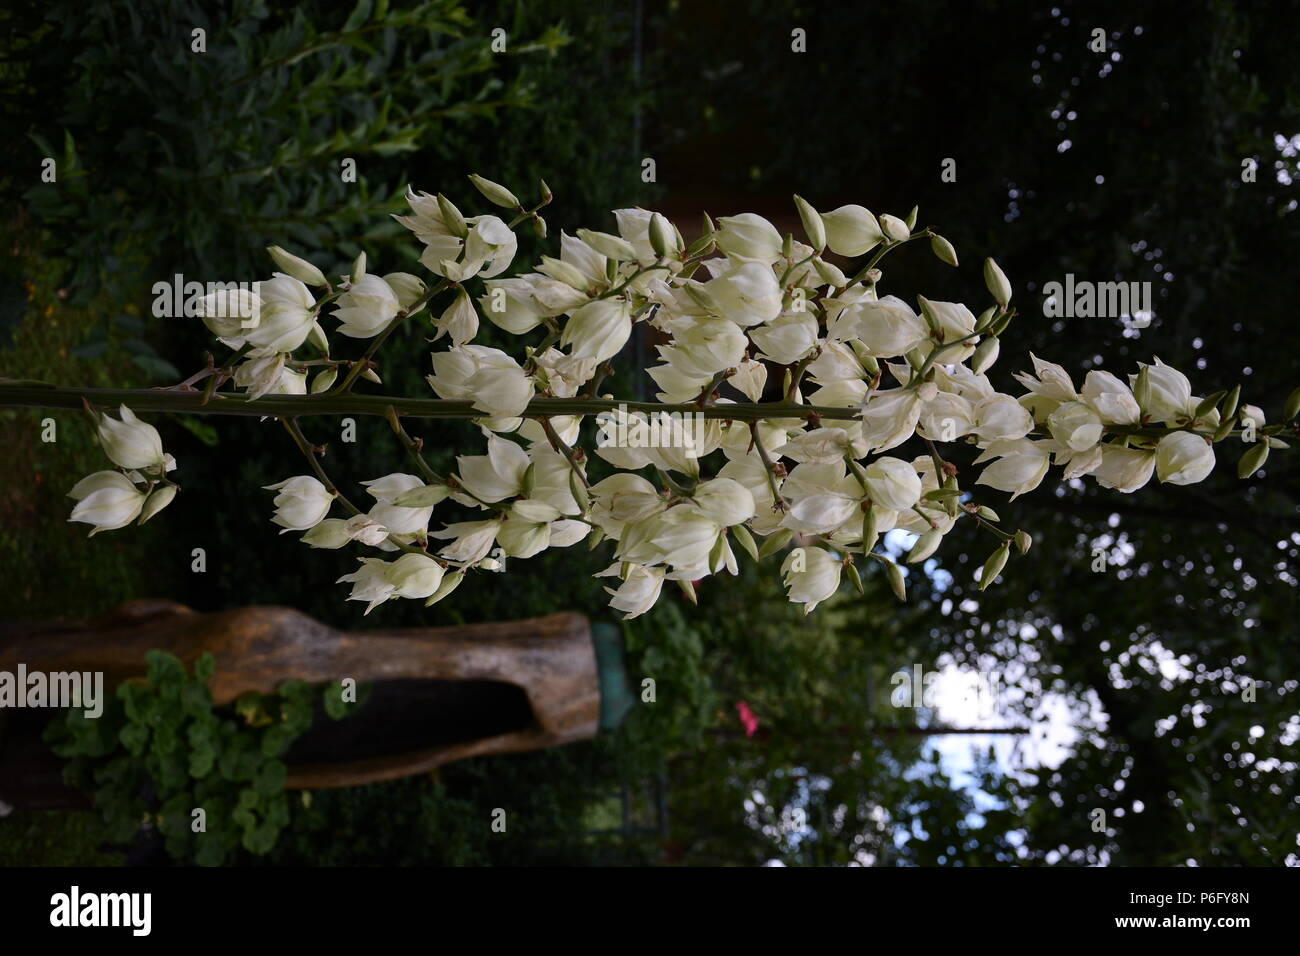 flowering white yucca in a flower and summer garden Stock Photo